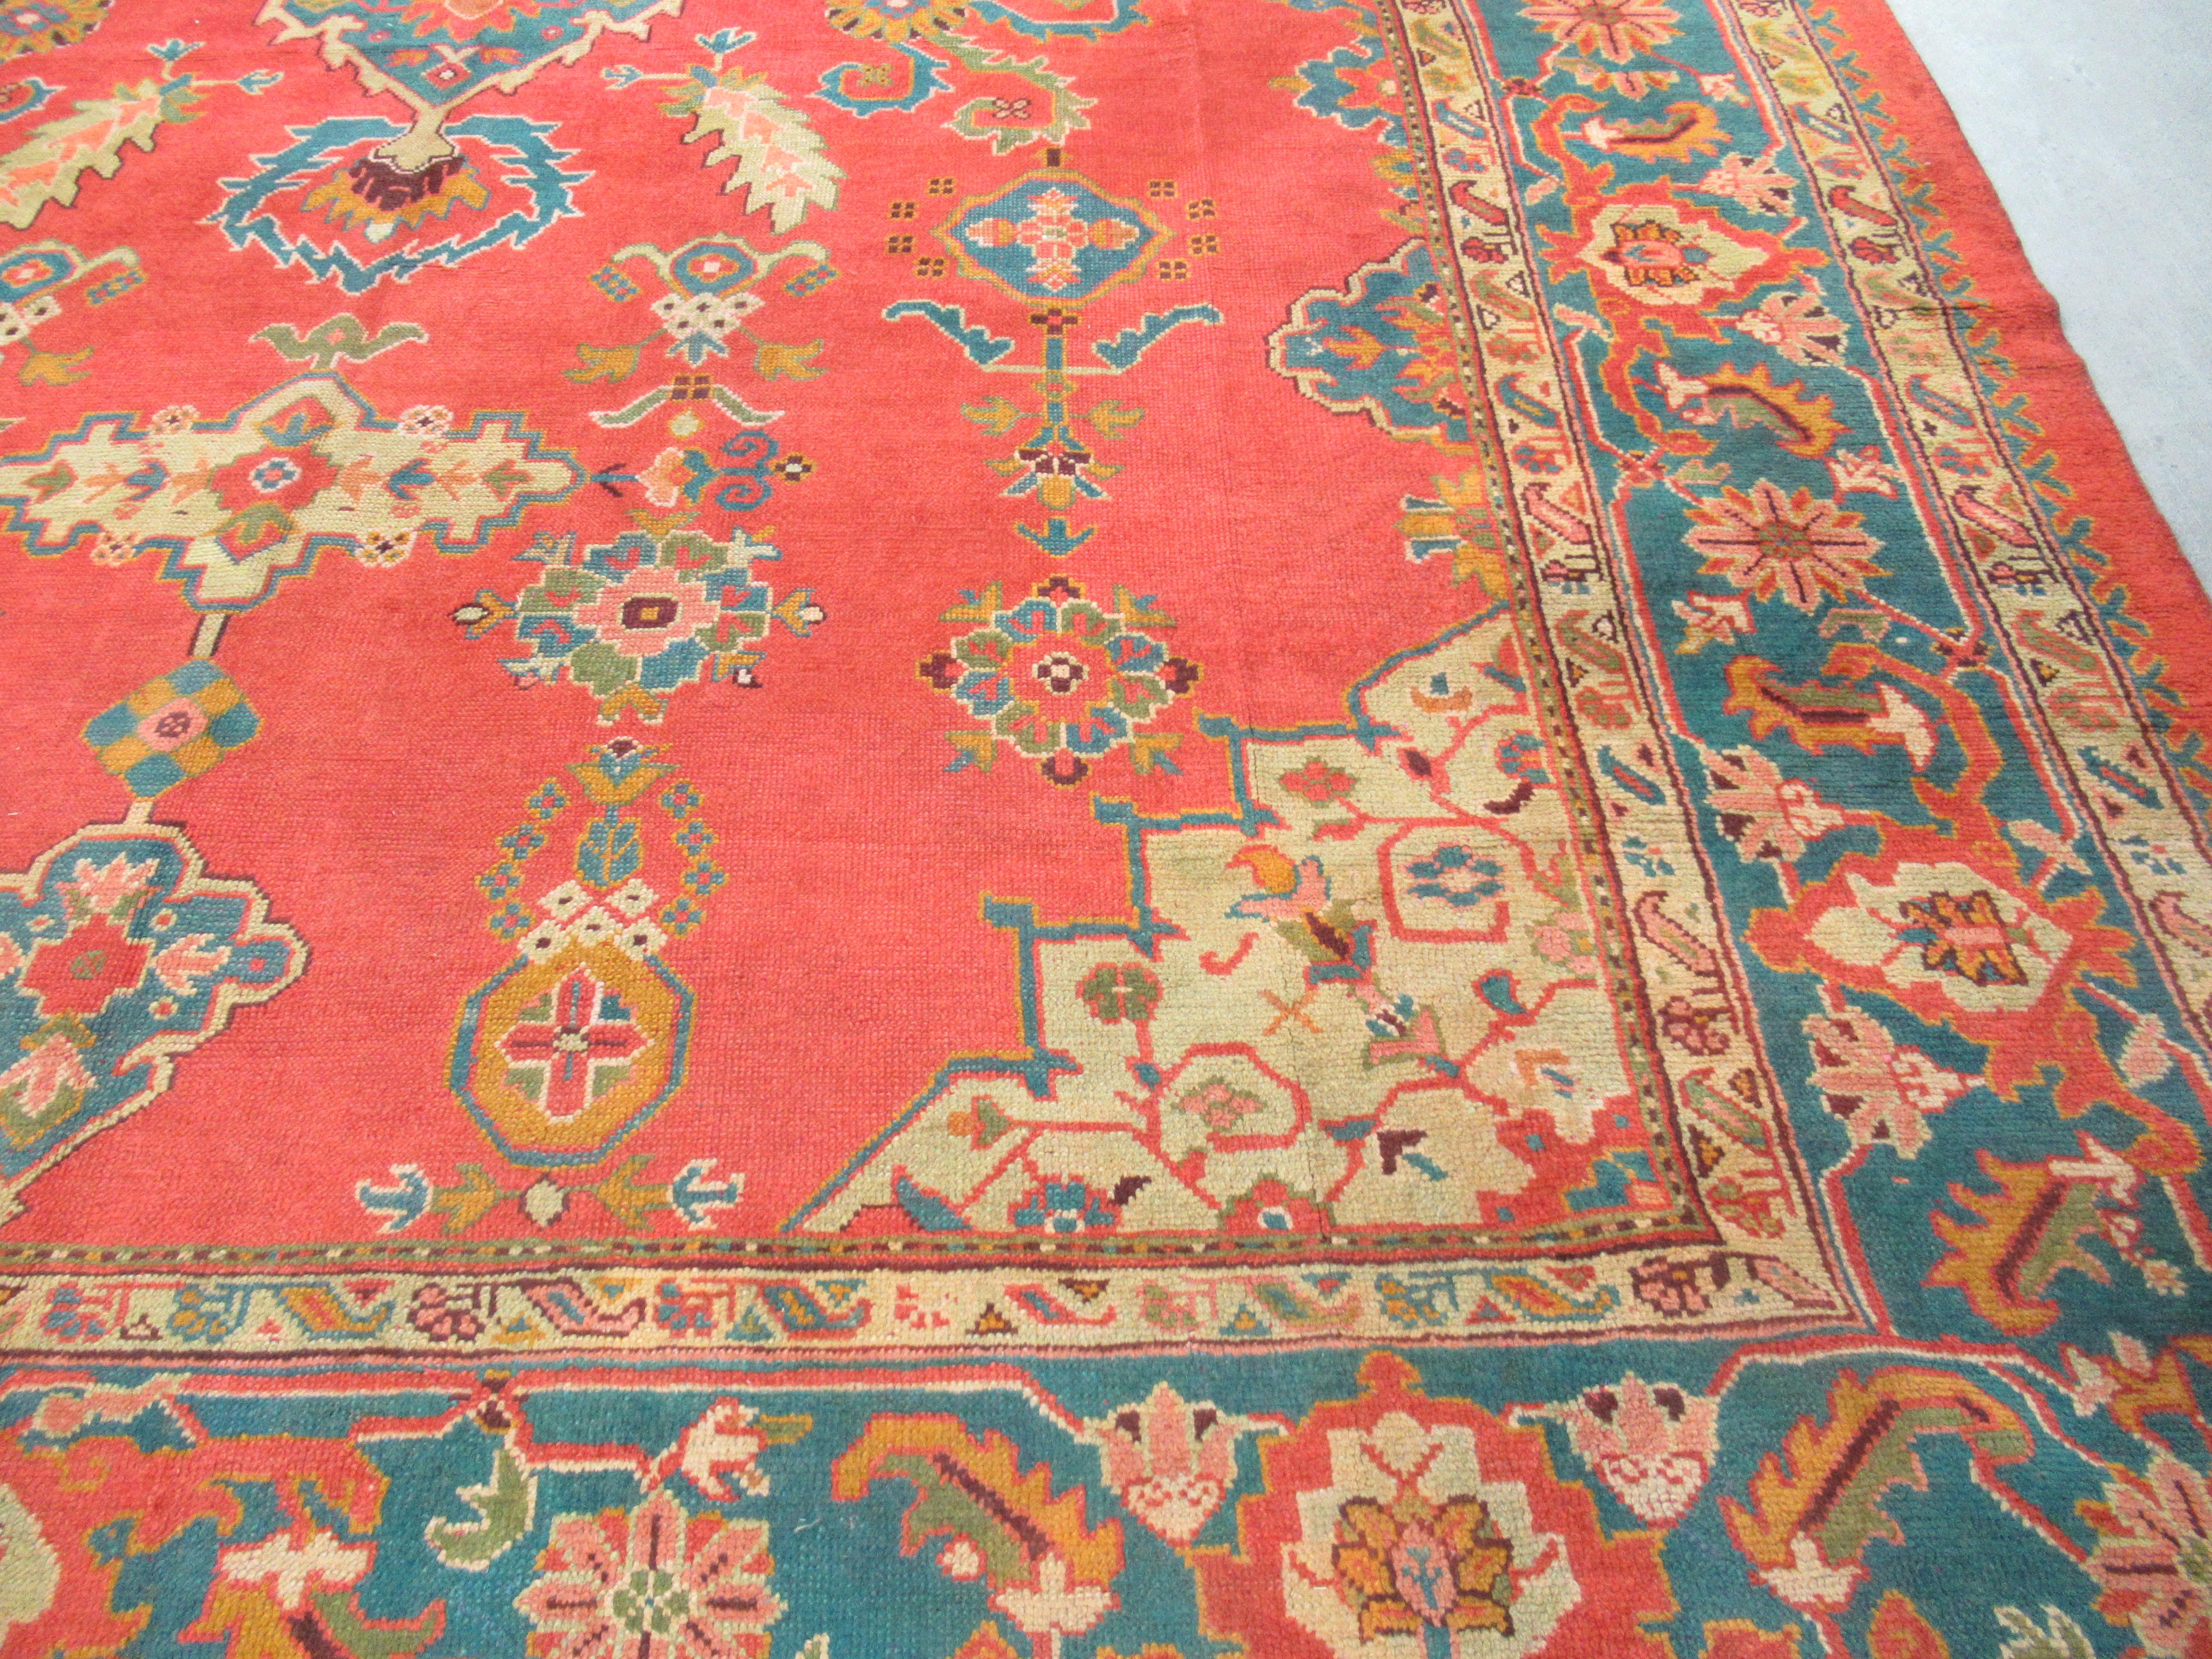 Antique Turkish Oushak carpet of outstanding colour with a small medallion design.
A truly outstanding late 19th century Oushak carpet, the traditional small medallion design is on a very soft warm red ground, the design in soft pastel colours